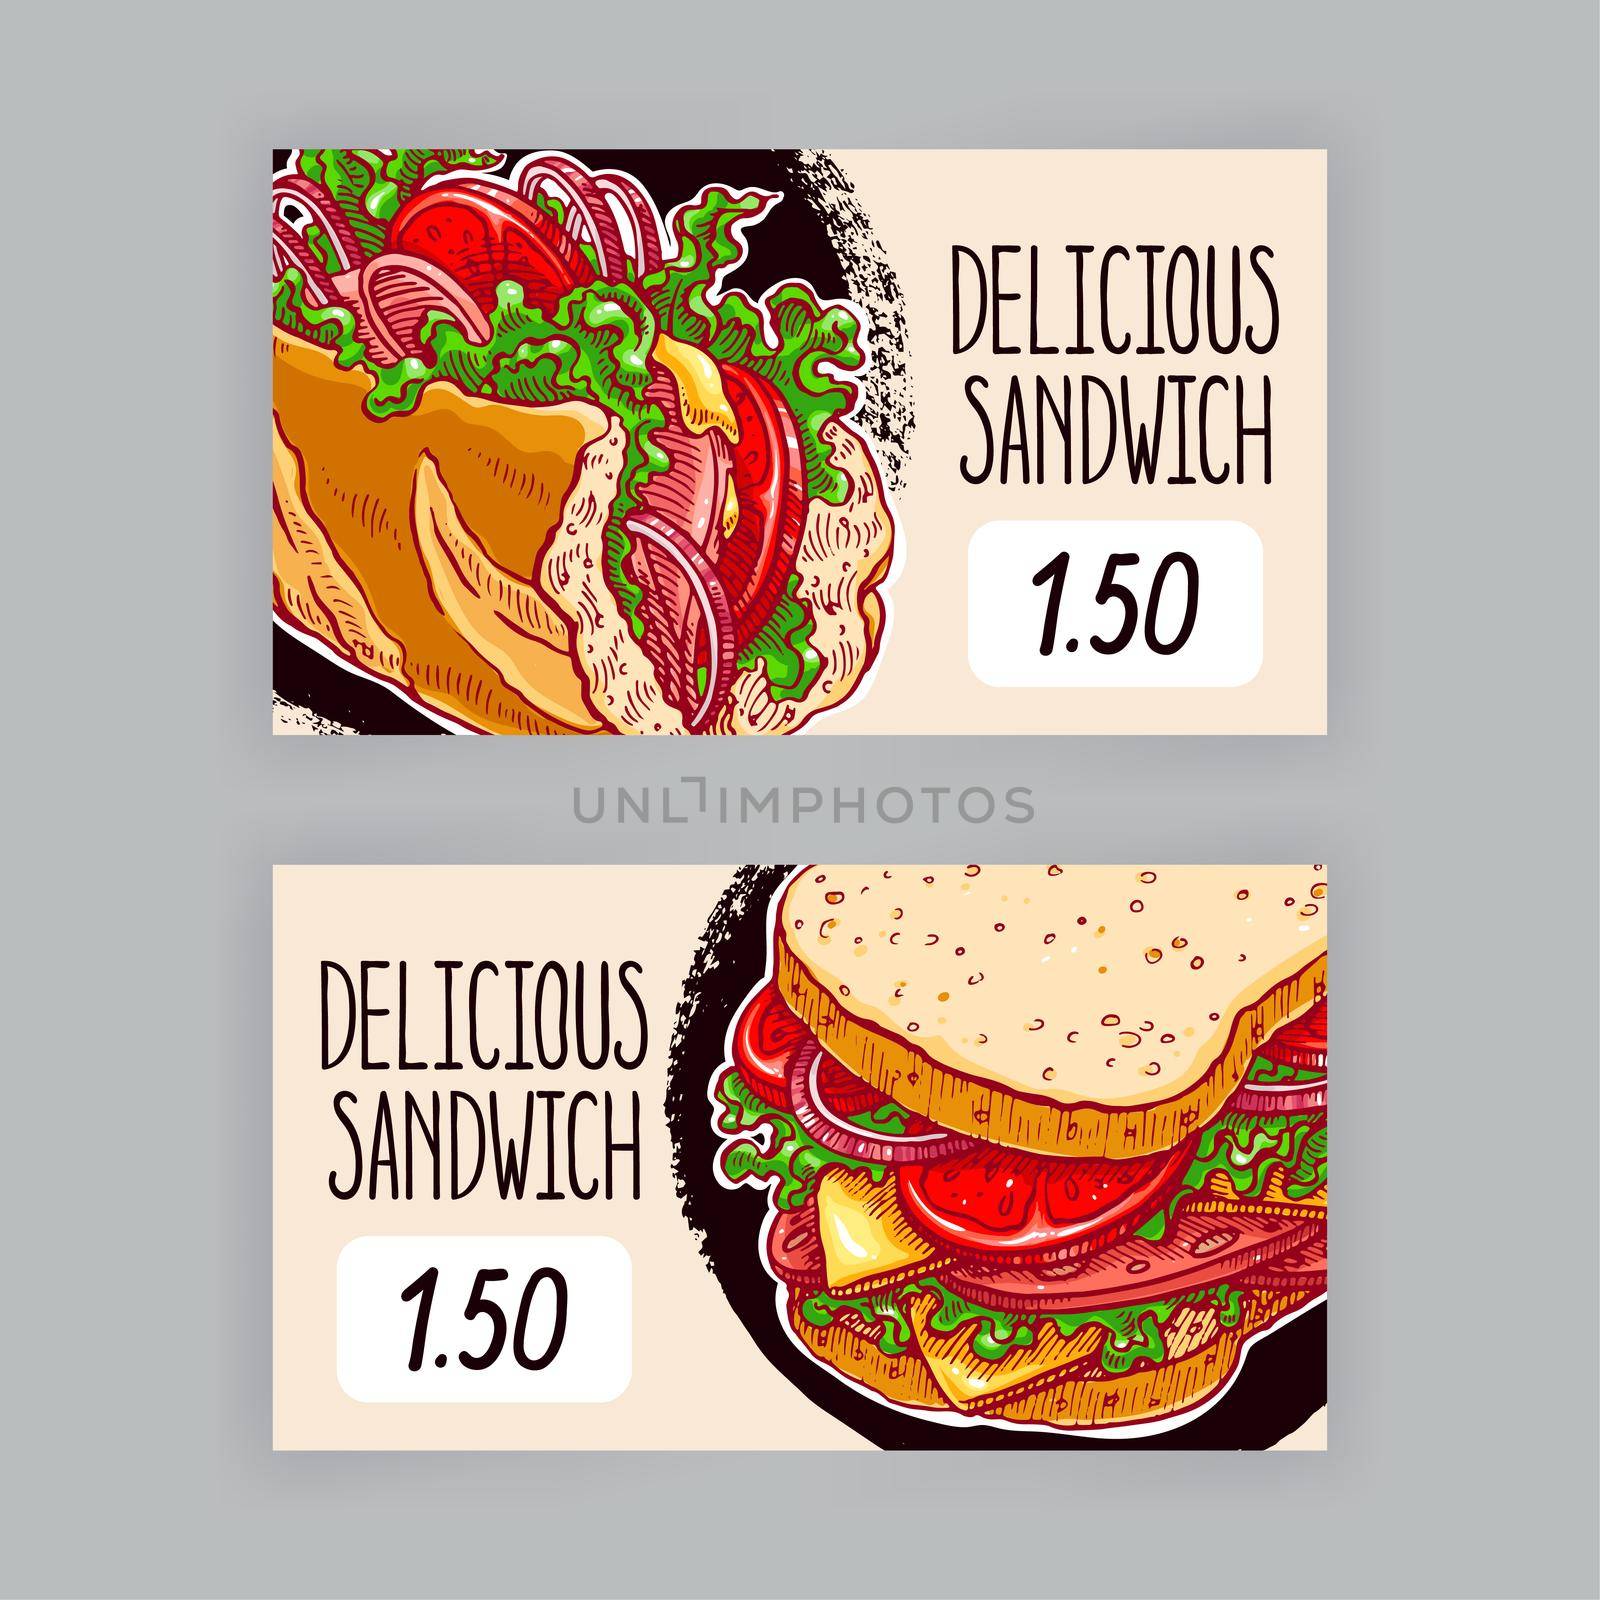 Two banners with sandwiches by melazerg